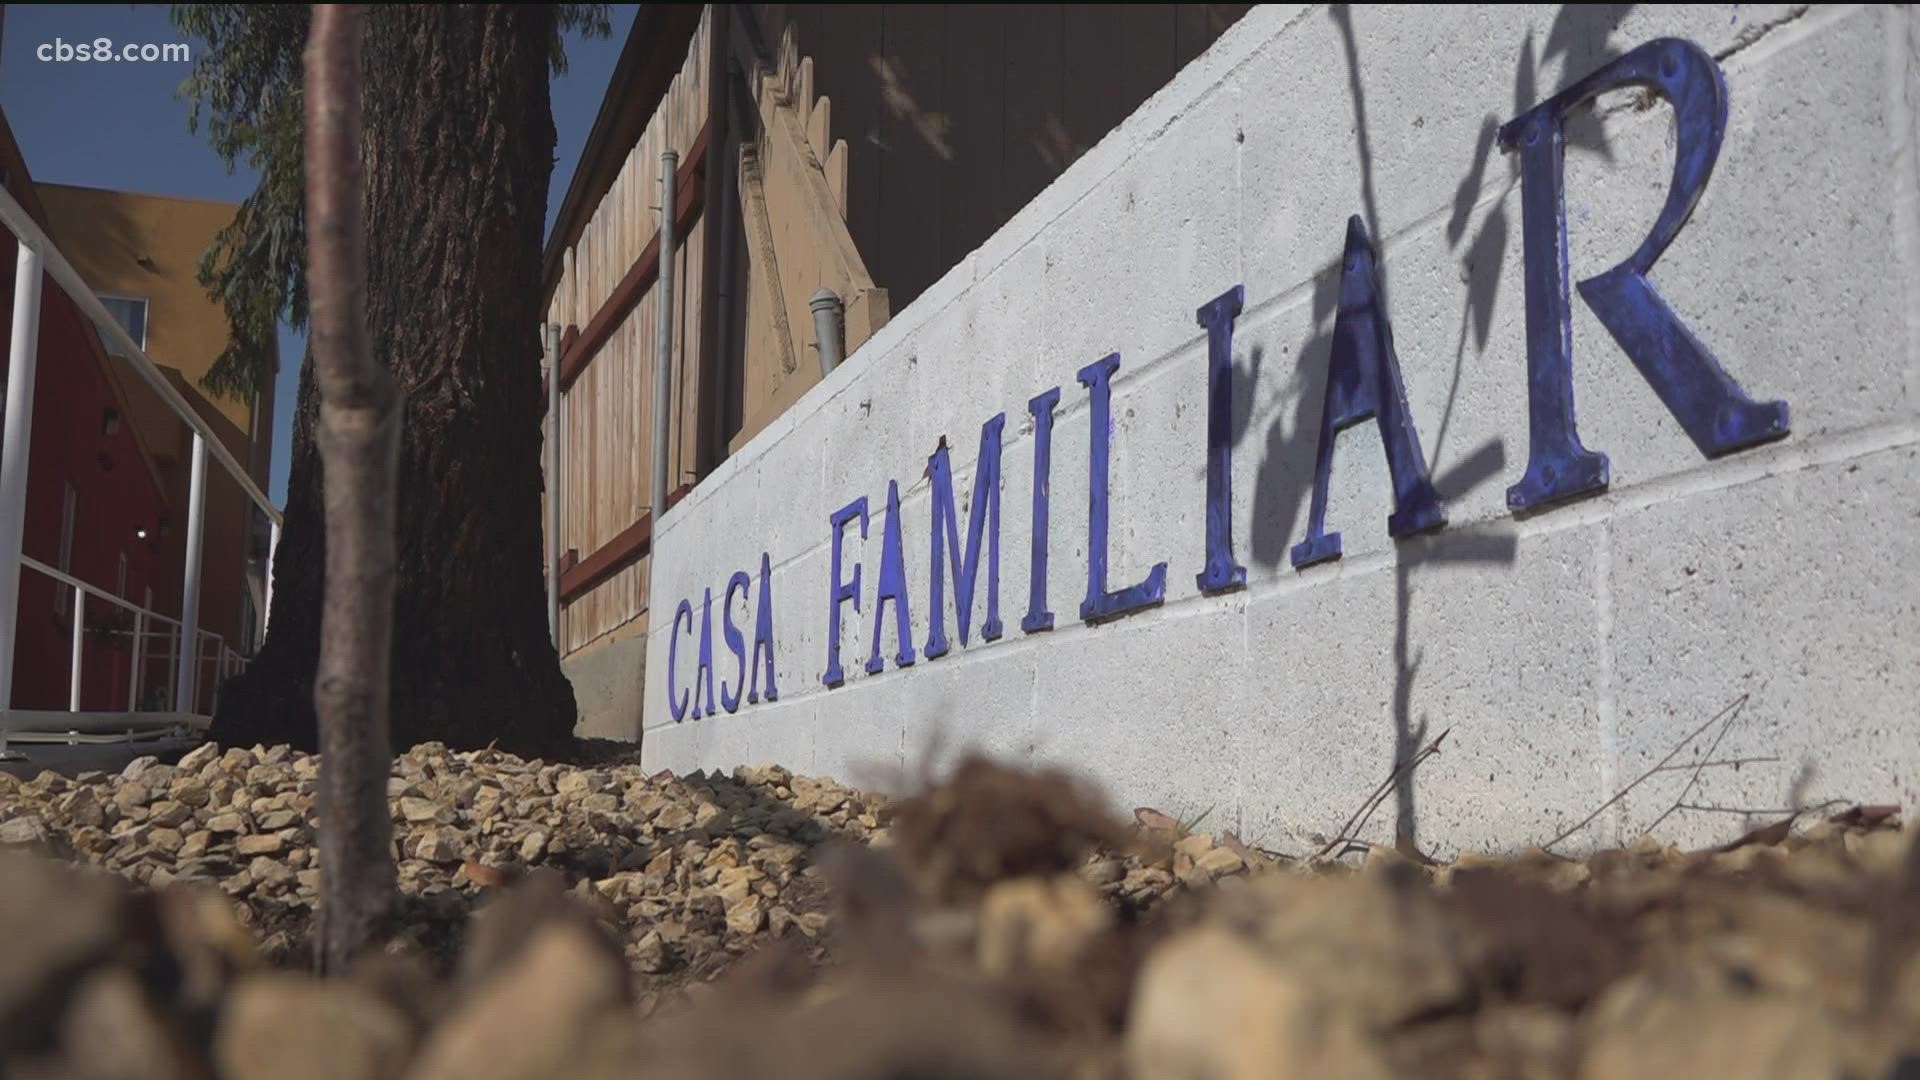 For nearly 50 years, Casa Familiar has helped support the border community with affordable housing, immigration help, and more.